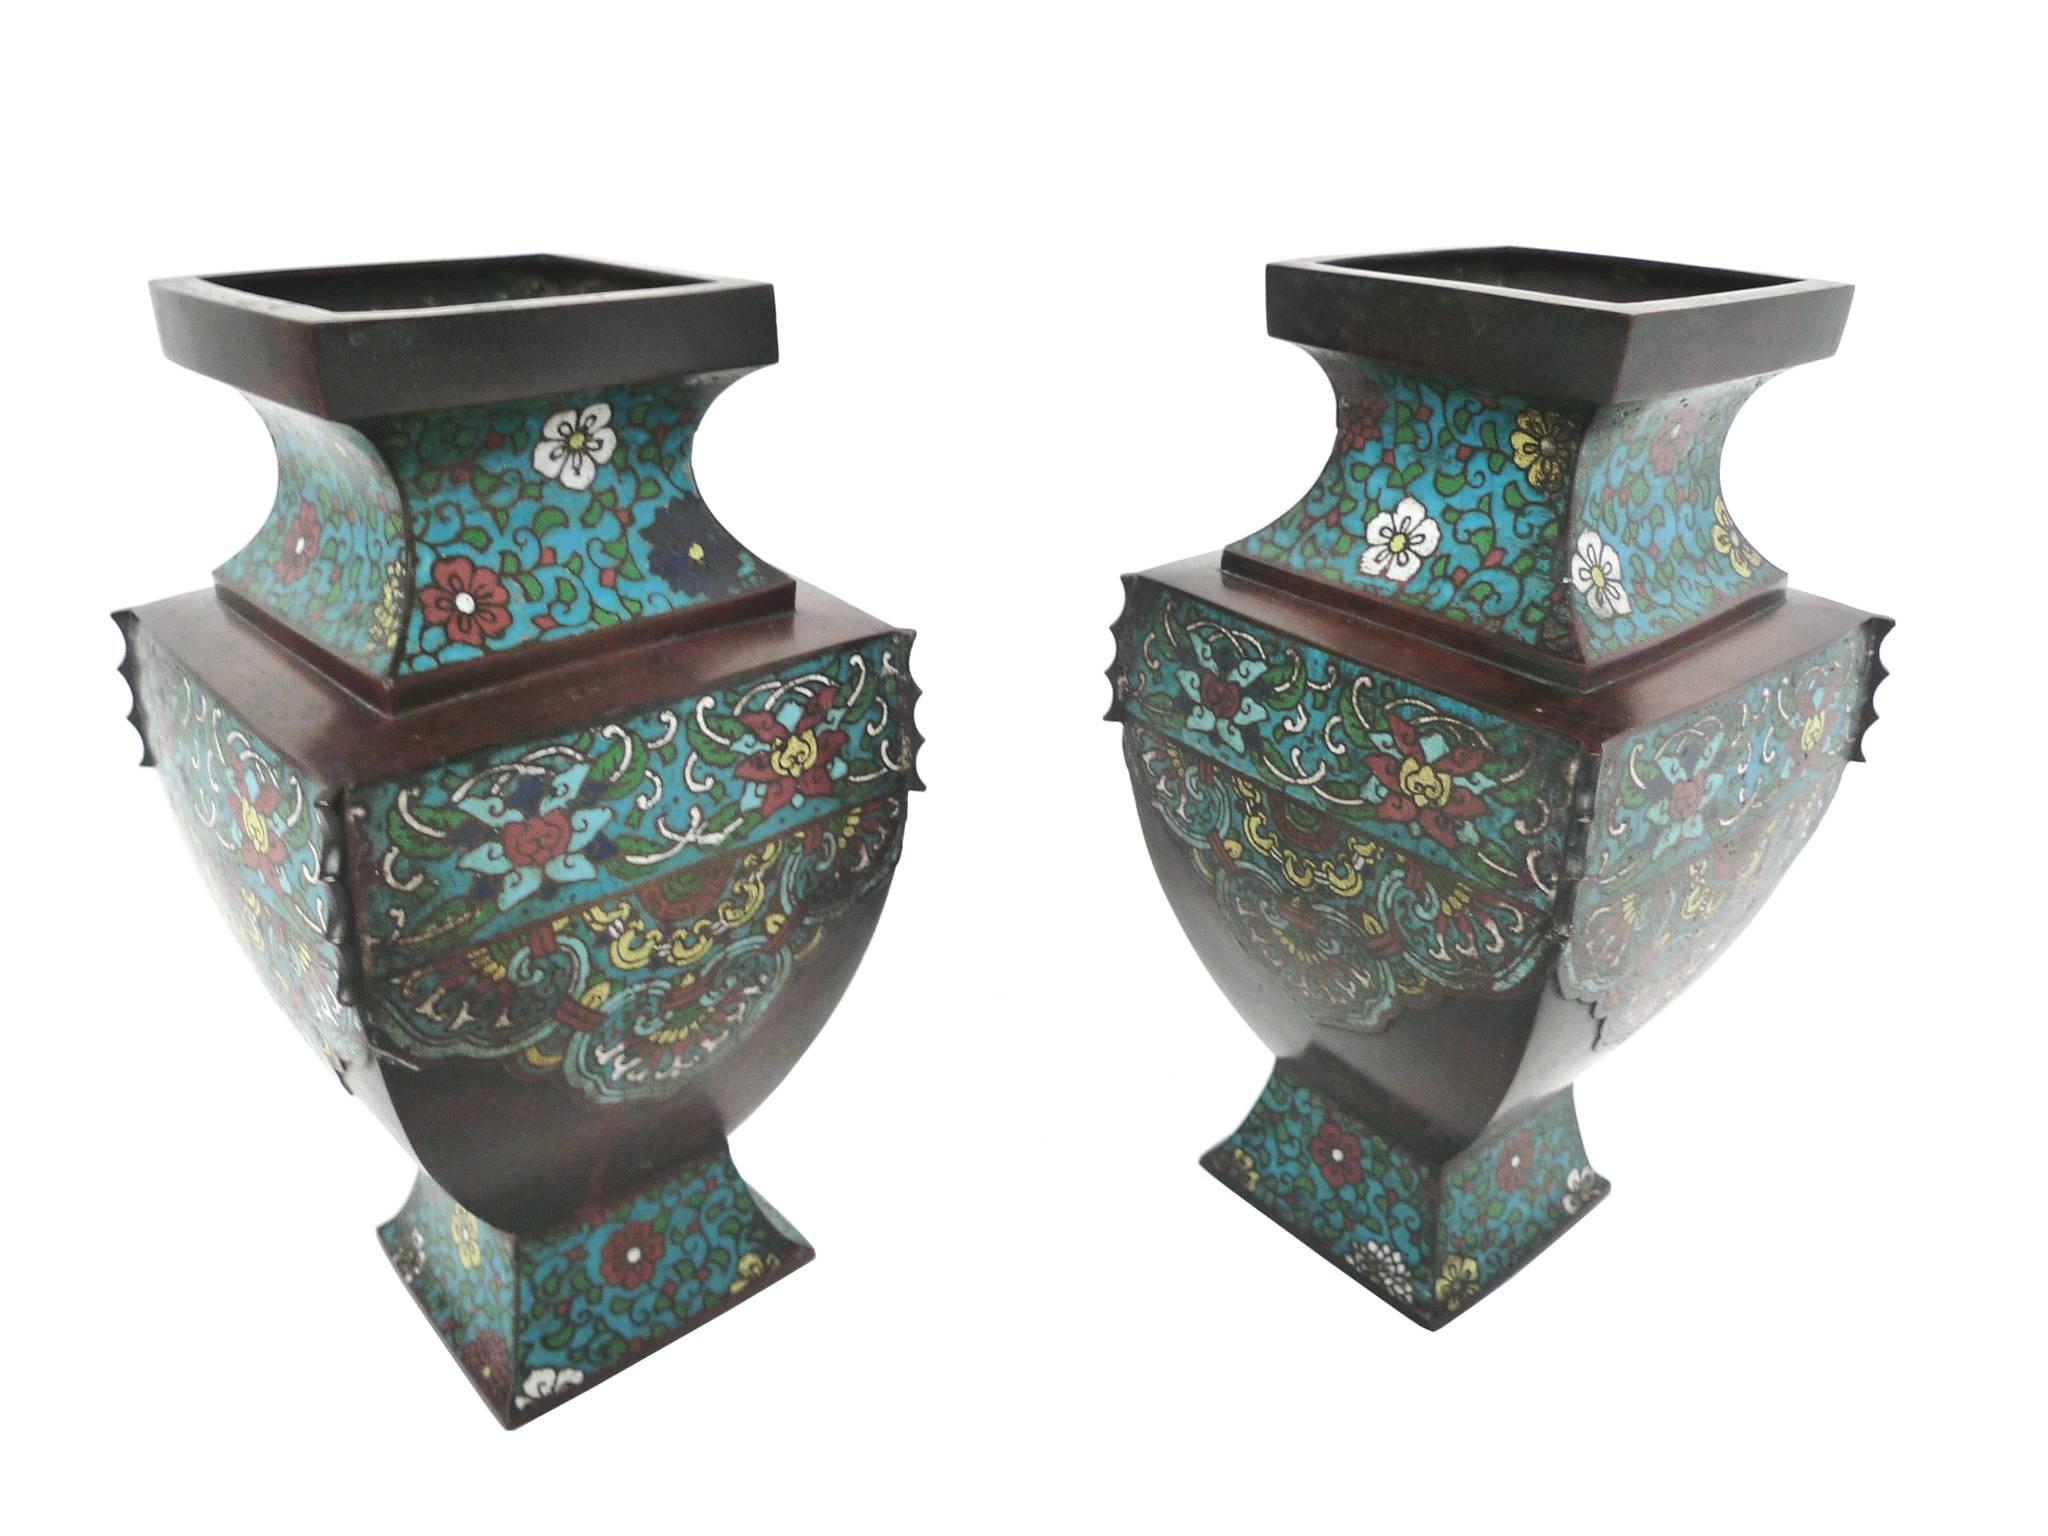 These early 20th century Asian bronze urns have beautiful designs rendered in the cloisonné technique. The floral patterns adorn the bronze in a colorful, rich palette.